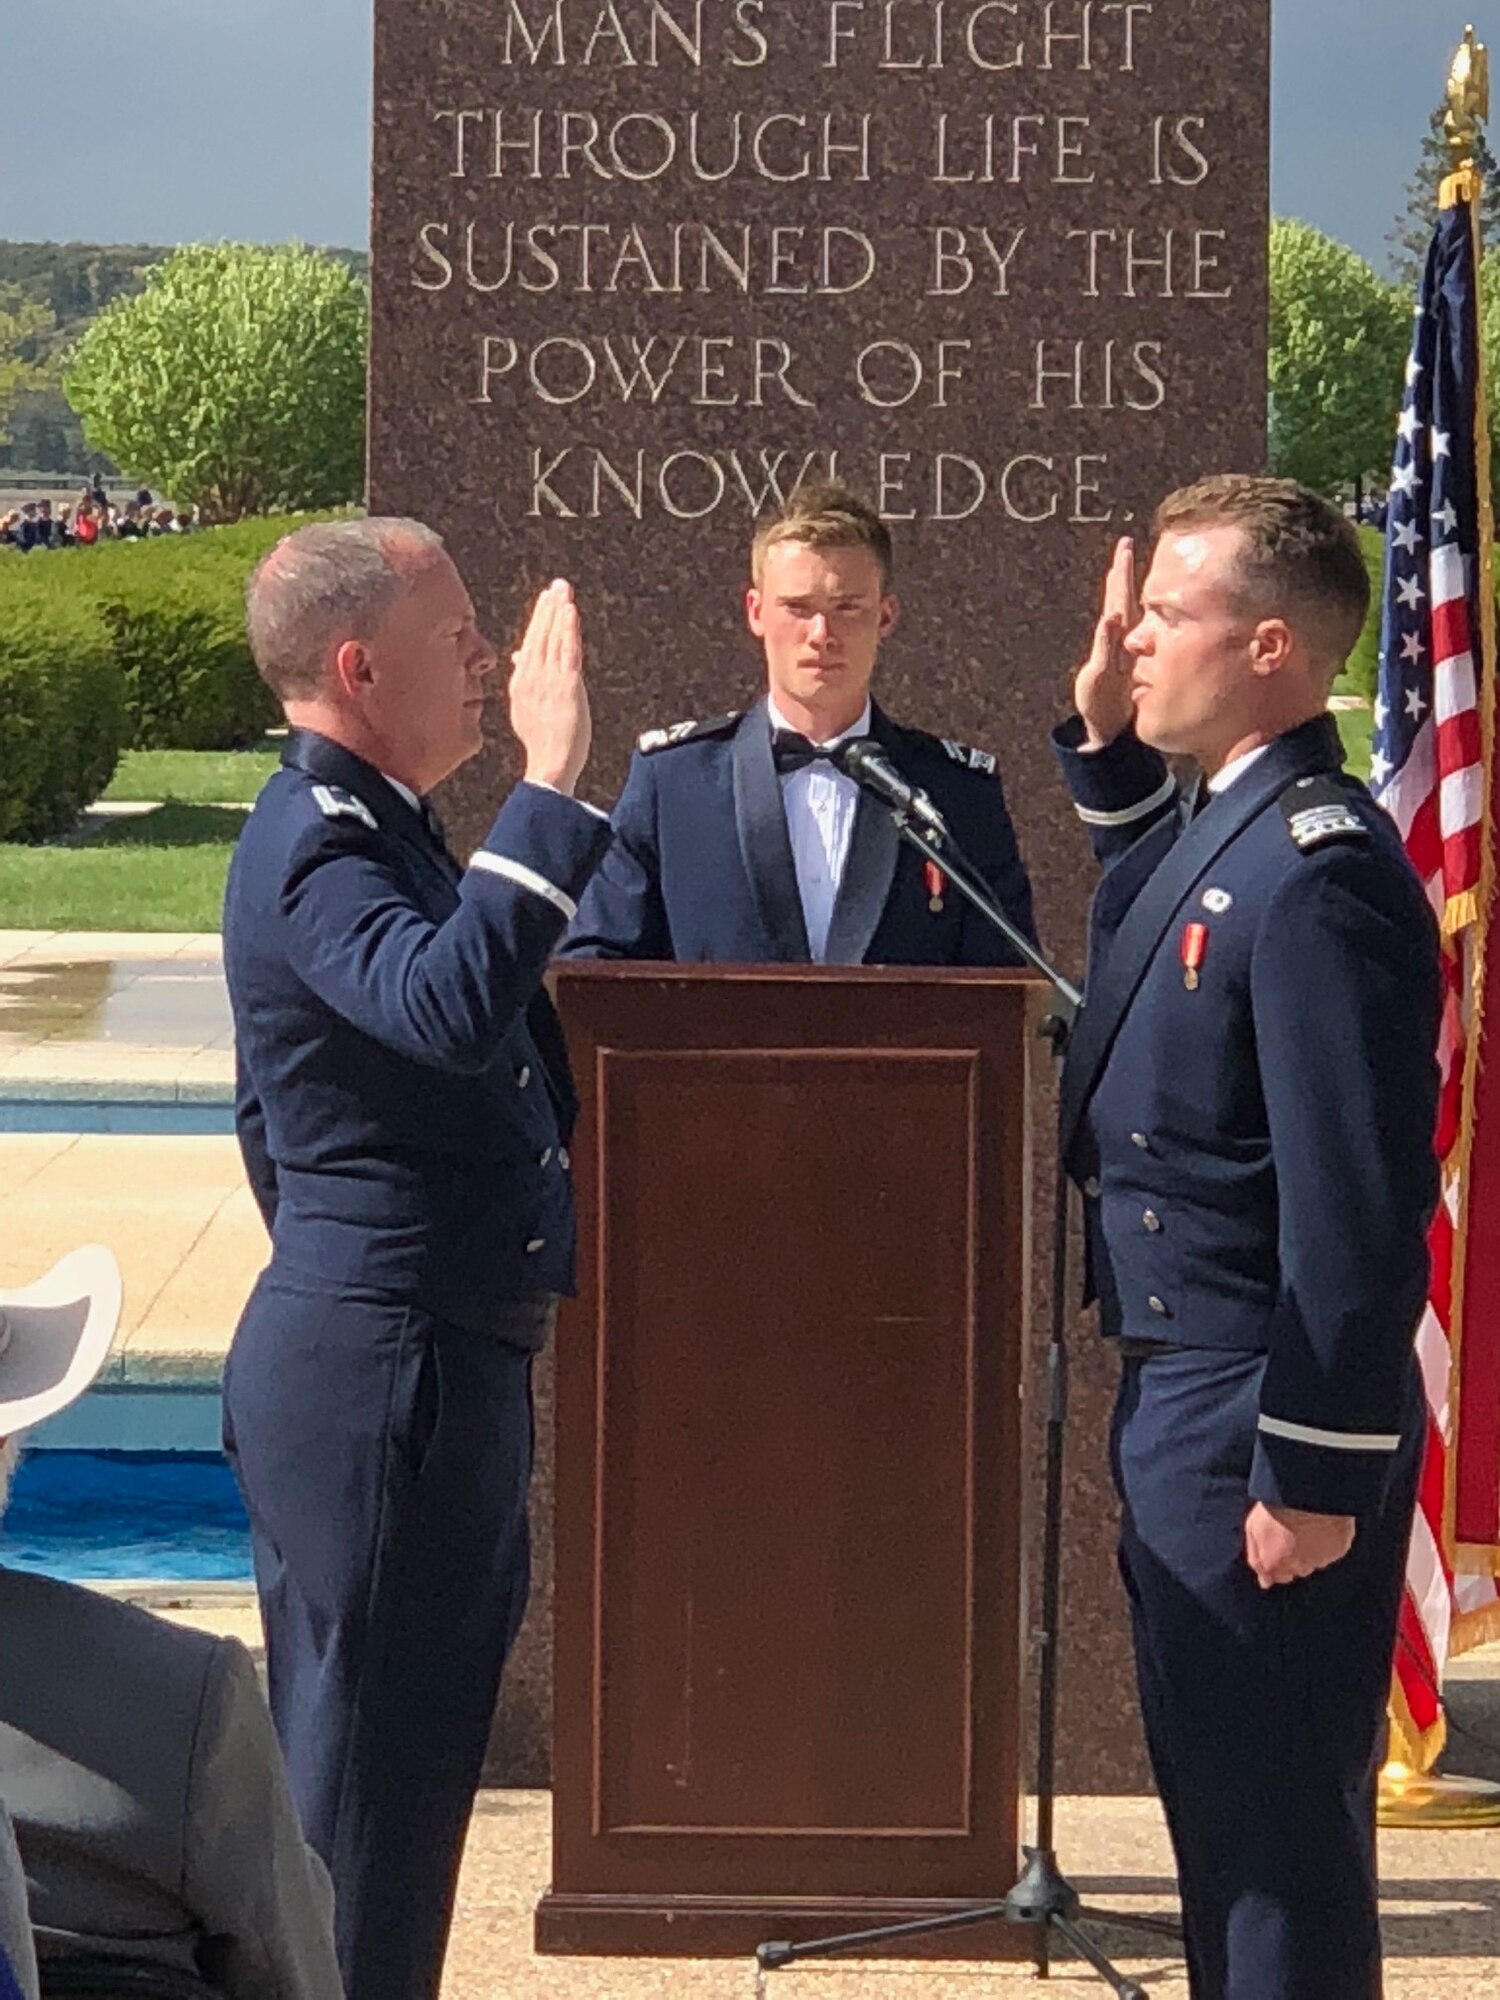 U.S. Air Force Col. Joseph Anderson, Air Force Medical Support Agency medical readiness division chief, administers the oath of office to his son, U.S. Air Force 2nd Lt. Ben Anderson, at the U.S. Air Force Academy in Colorado Springs, Colo., May 22, 2018. (Courtesy photo)